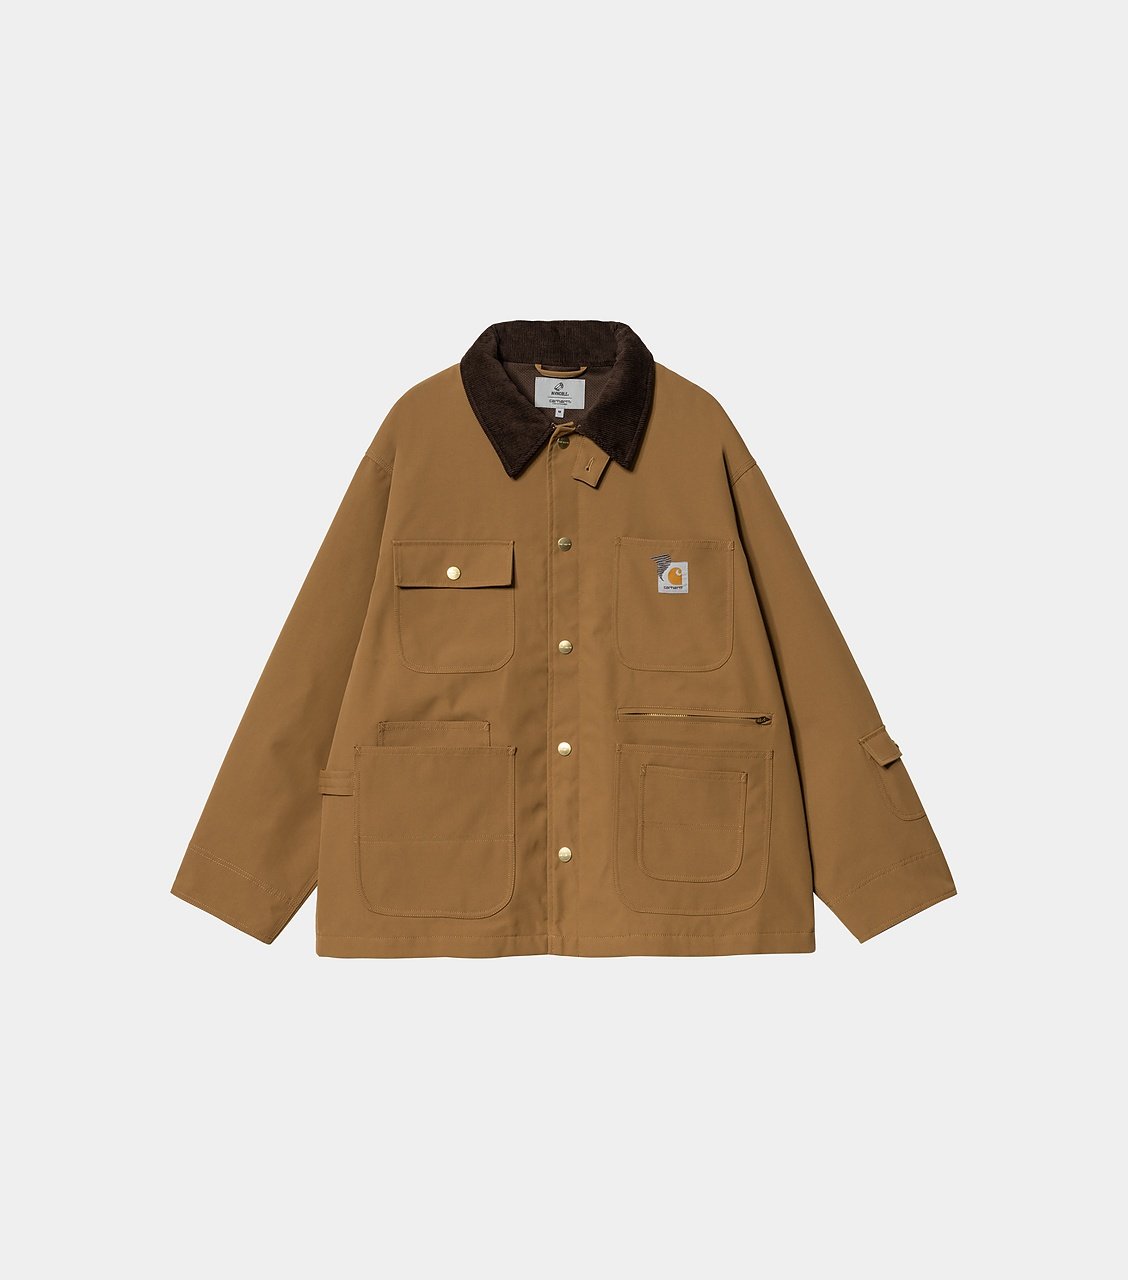 Carhartt Work In Progress: INVINCIBLE® 15th Anniversary with